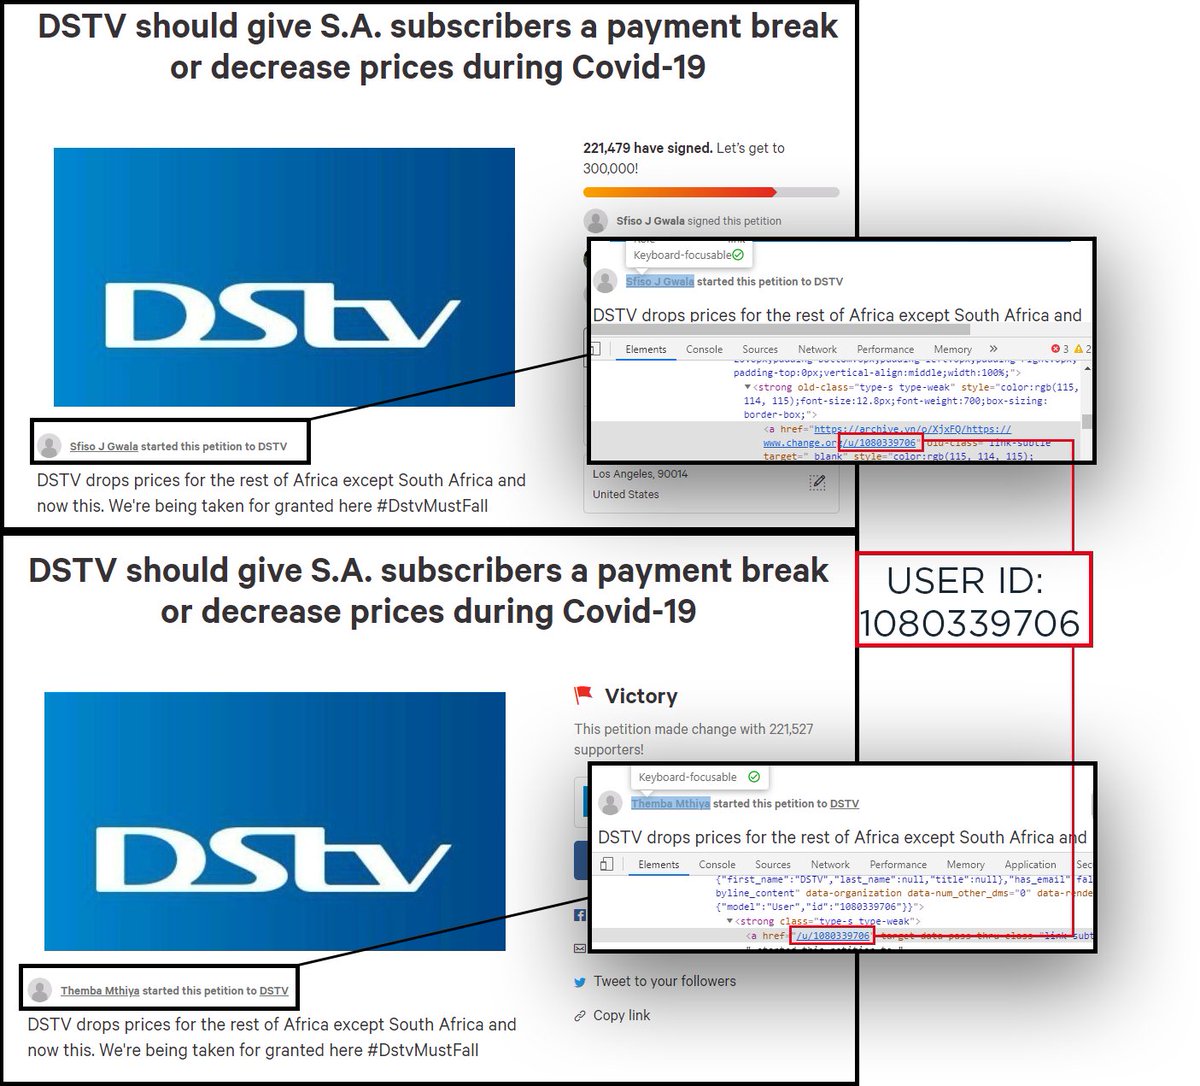 Since then, Gwala has attempted to hide evidence linking him to the account. "Sfiso J Gwala" was replaced as the author of the DSTV  http://Change.org  by "Themba Mthiya".But the website source code shows this is the same user as Sfiso J Gwala that created the petition.